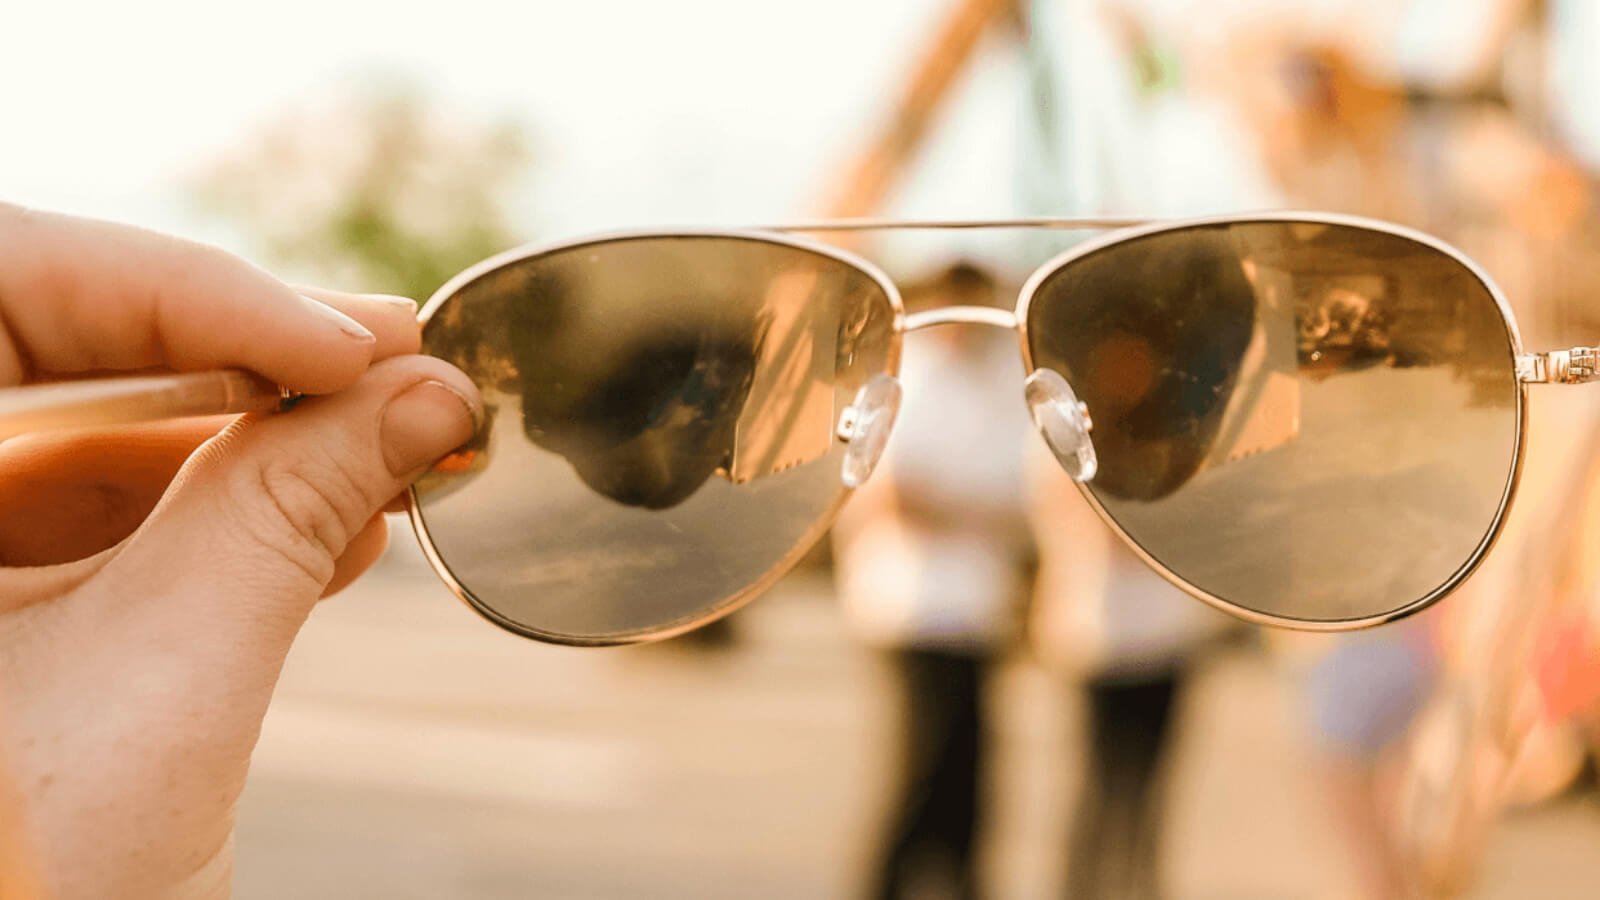 How can you tell if sunglasses are UV protected